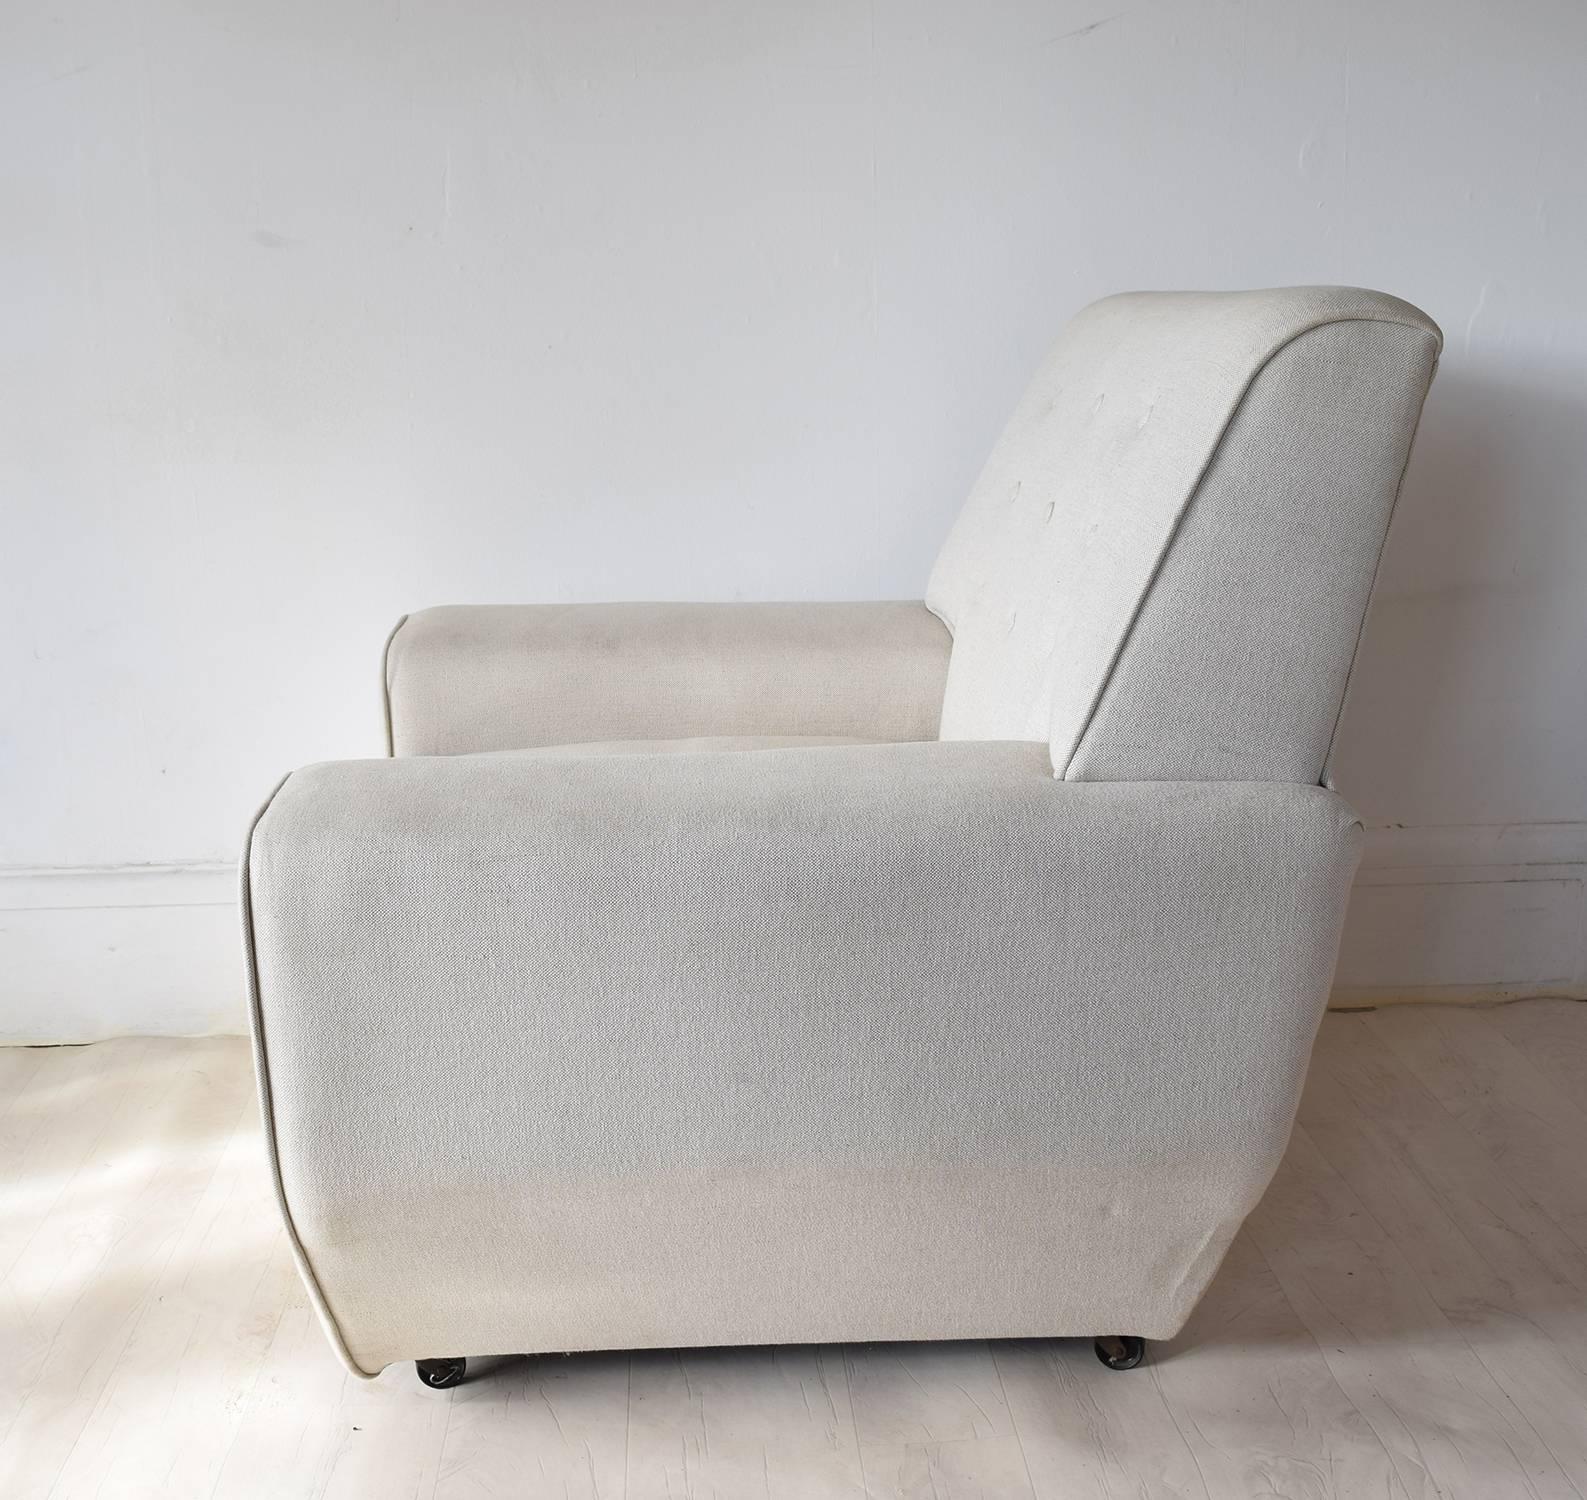 Very architectural shape.

Highly evocative of the 1960s.

They have been re-upholstered in a very smart ivory colored linen

Designer unknown.
 